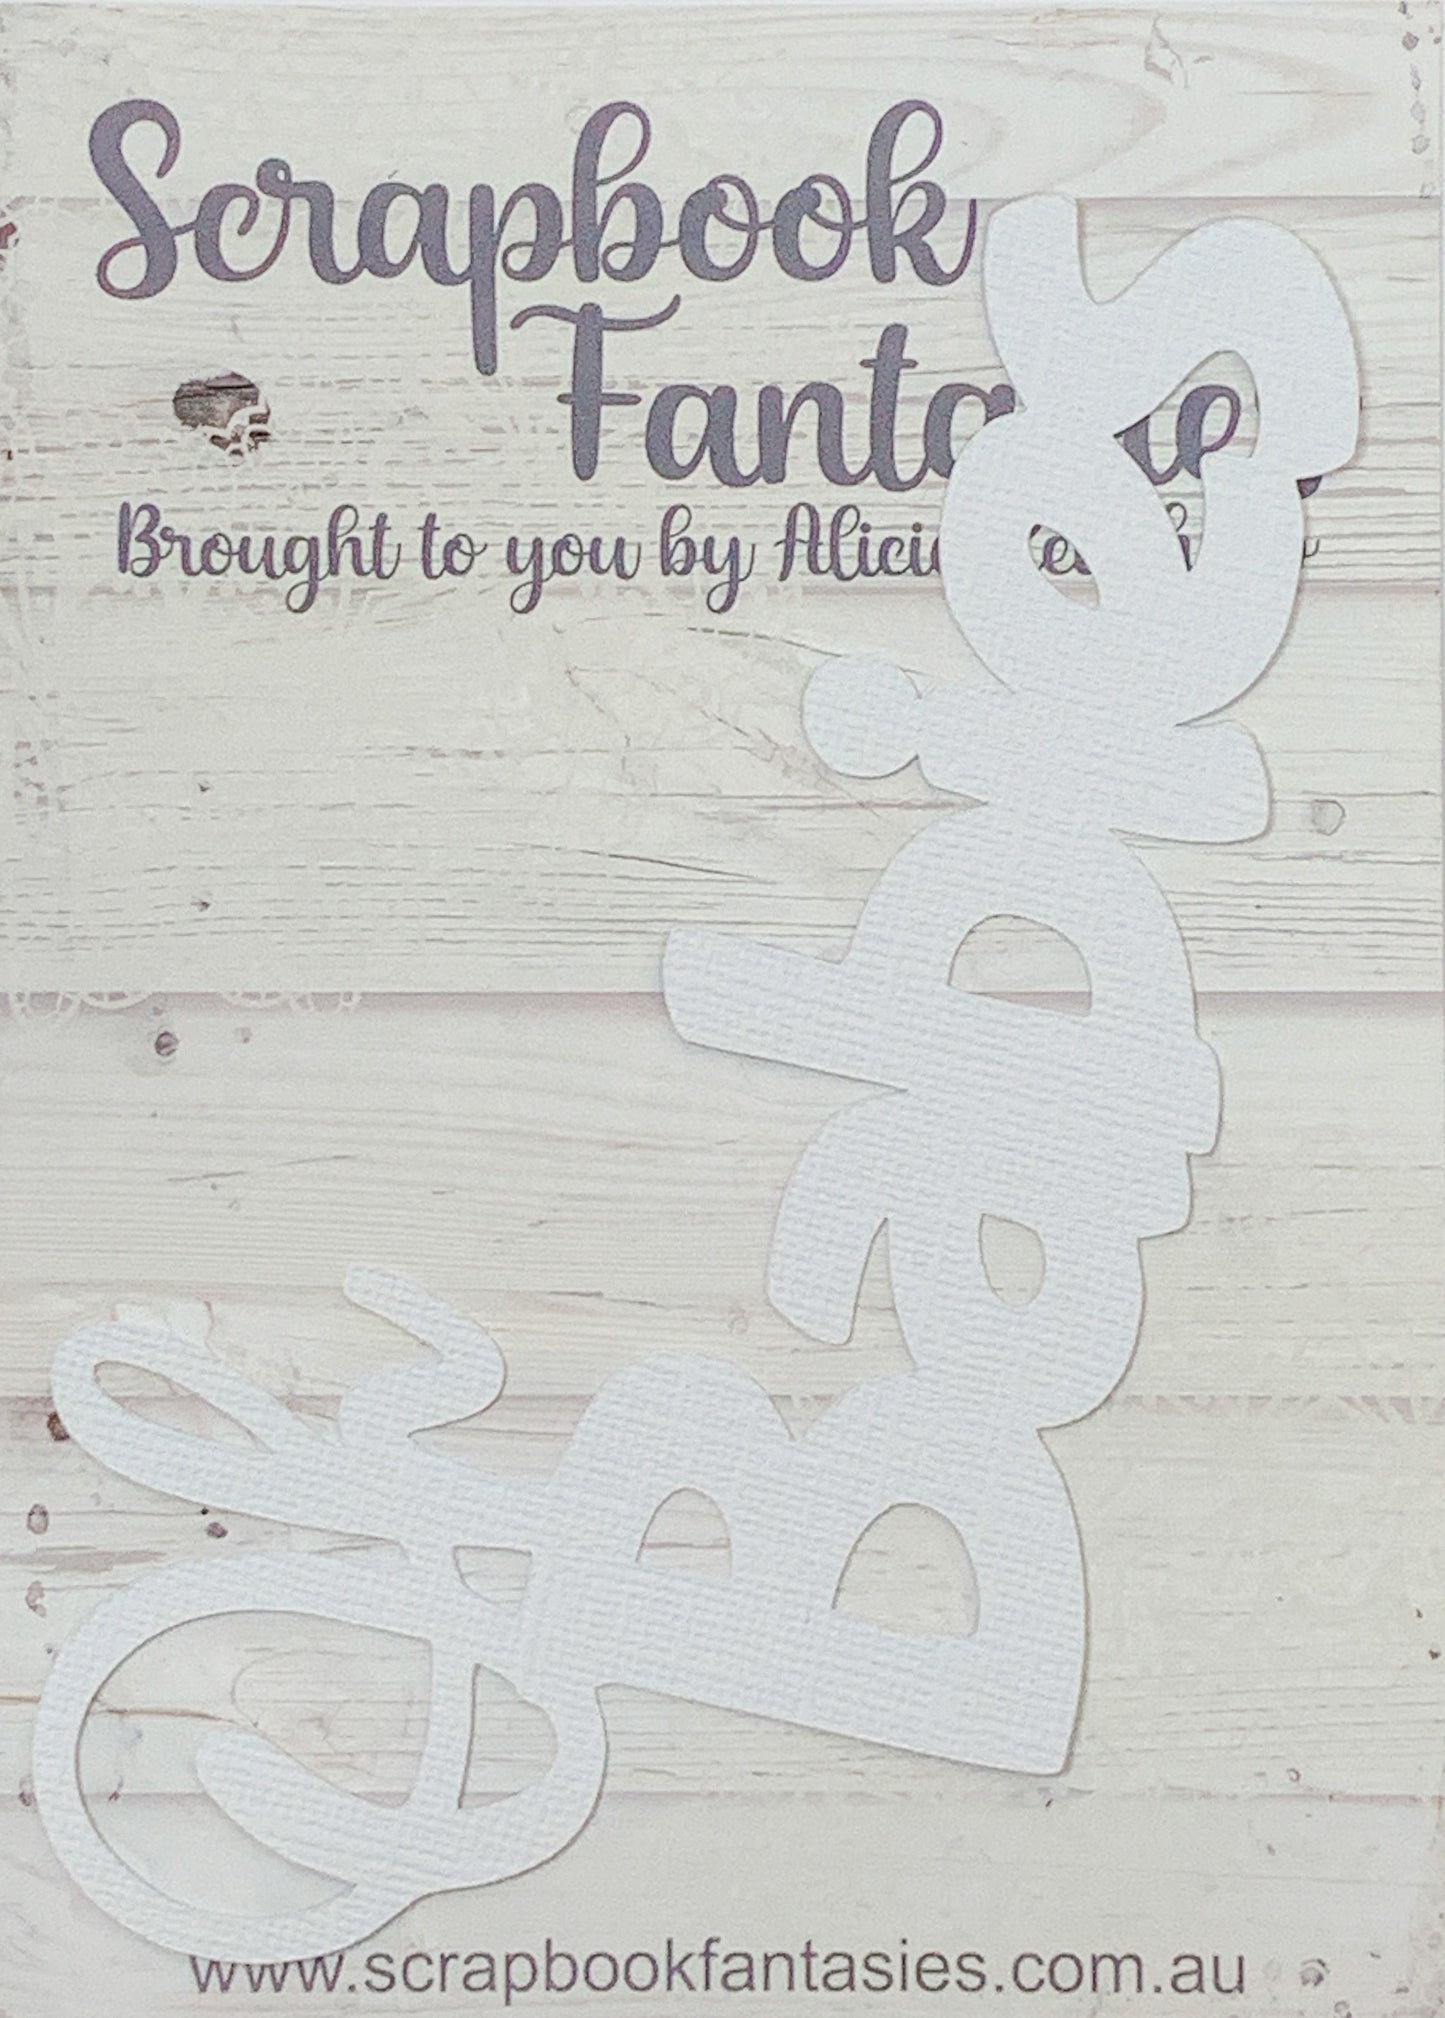 Family is Everything - Oh Babies 6"x3.25" White Linen Cardstock Title-Cut - Designed by Alicia Redshaw